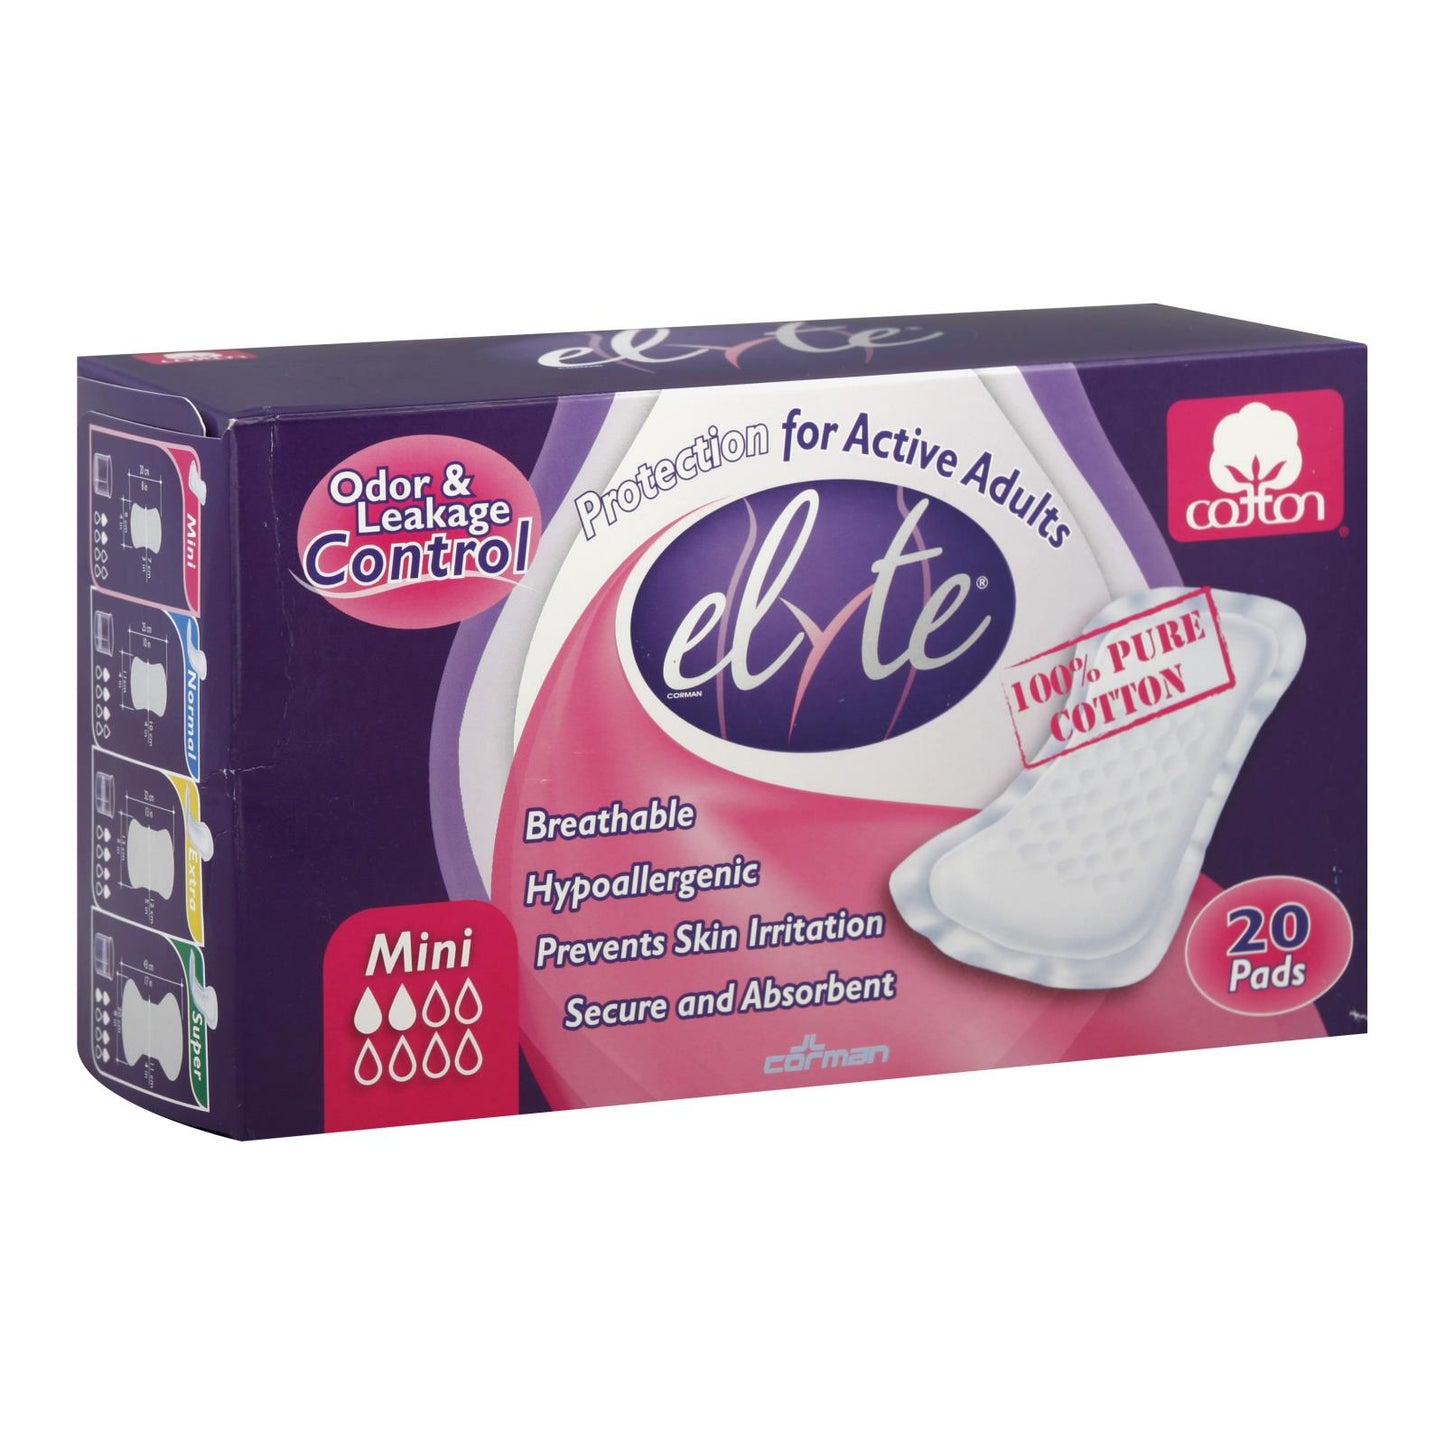 Elyte Light Cotton Incontinence Pads, Mini, 4 In X 8 In, 20 Pack